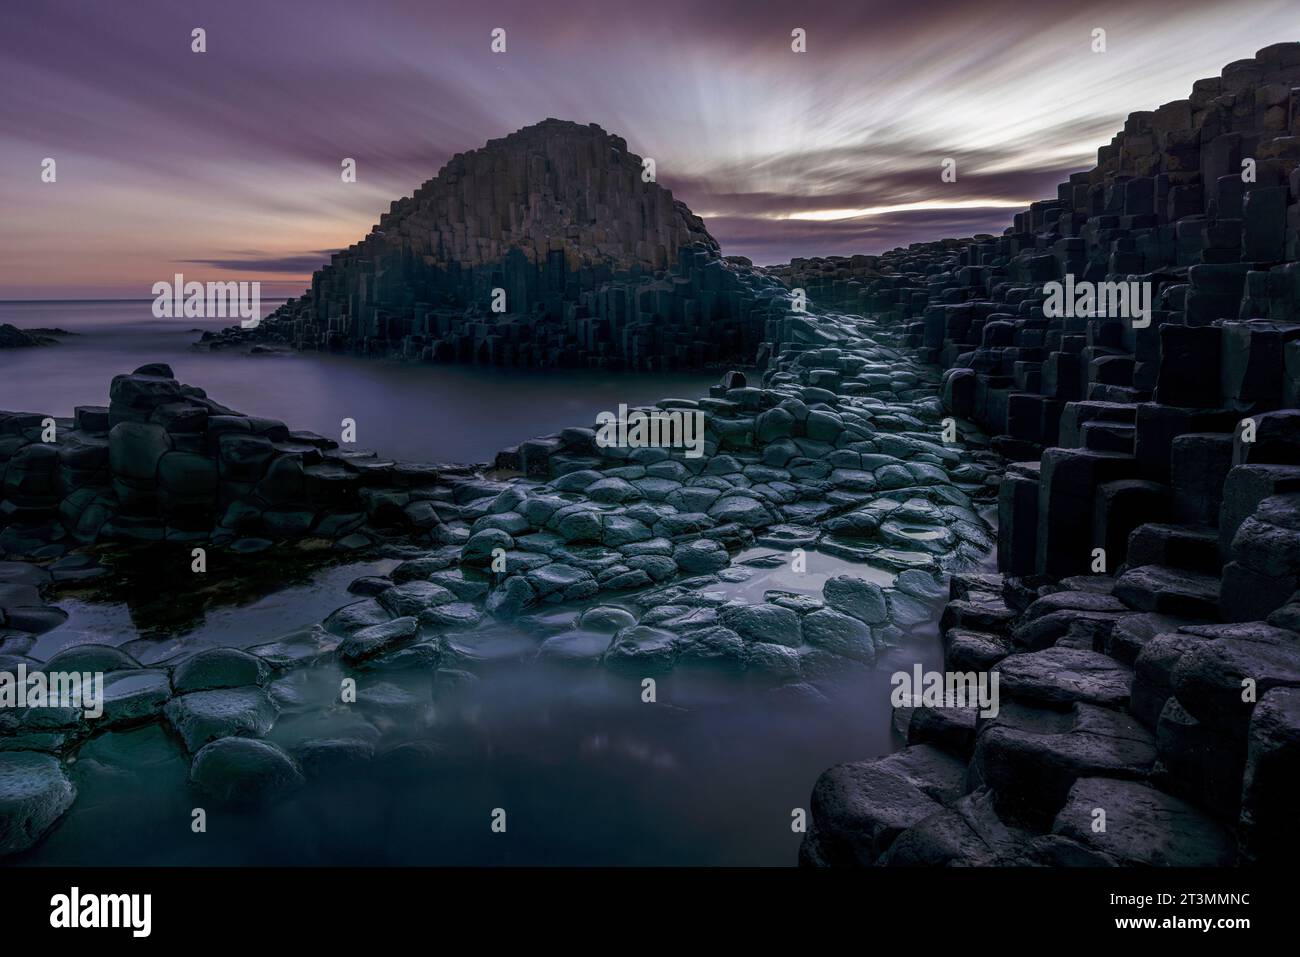 The Giant's Causeway is a UNESCO World Heritage Site located on the coast of Northern Ireland. It is a geological wonder consisting of over 40,000 int Stock Photo